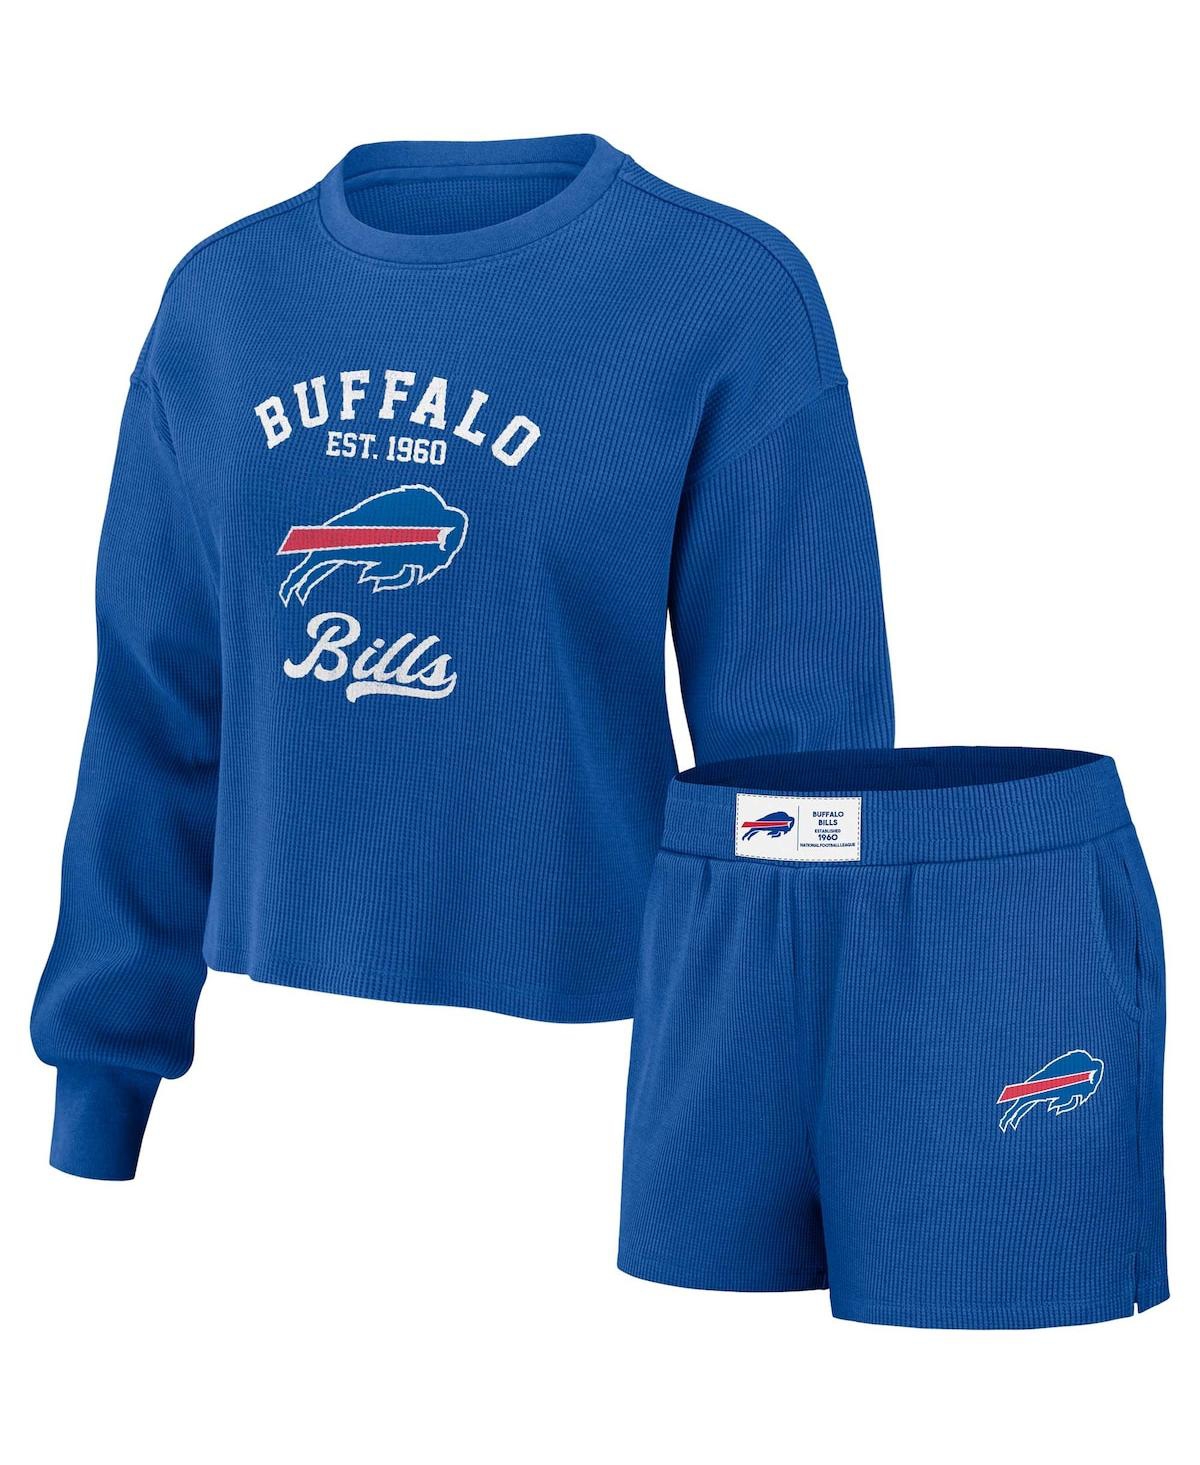 Wear By Erin Andrews Women's  Royal Distressed Buffalo Bills Waffle Knit Long Sleeve T-shirt And Shor